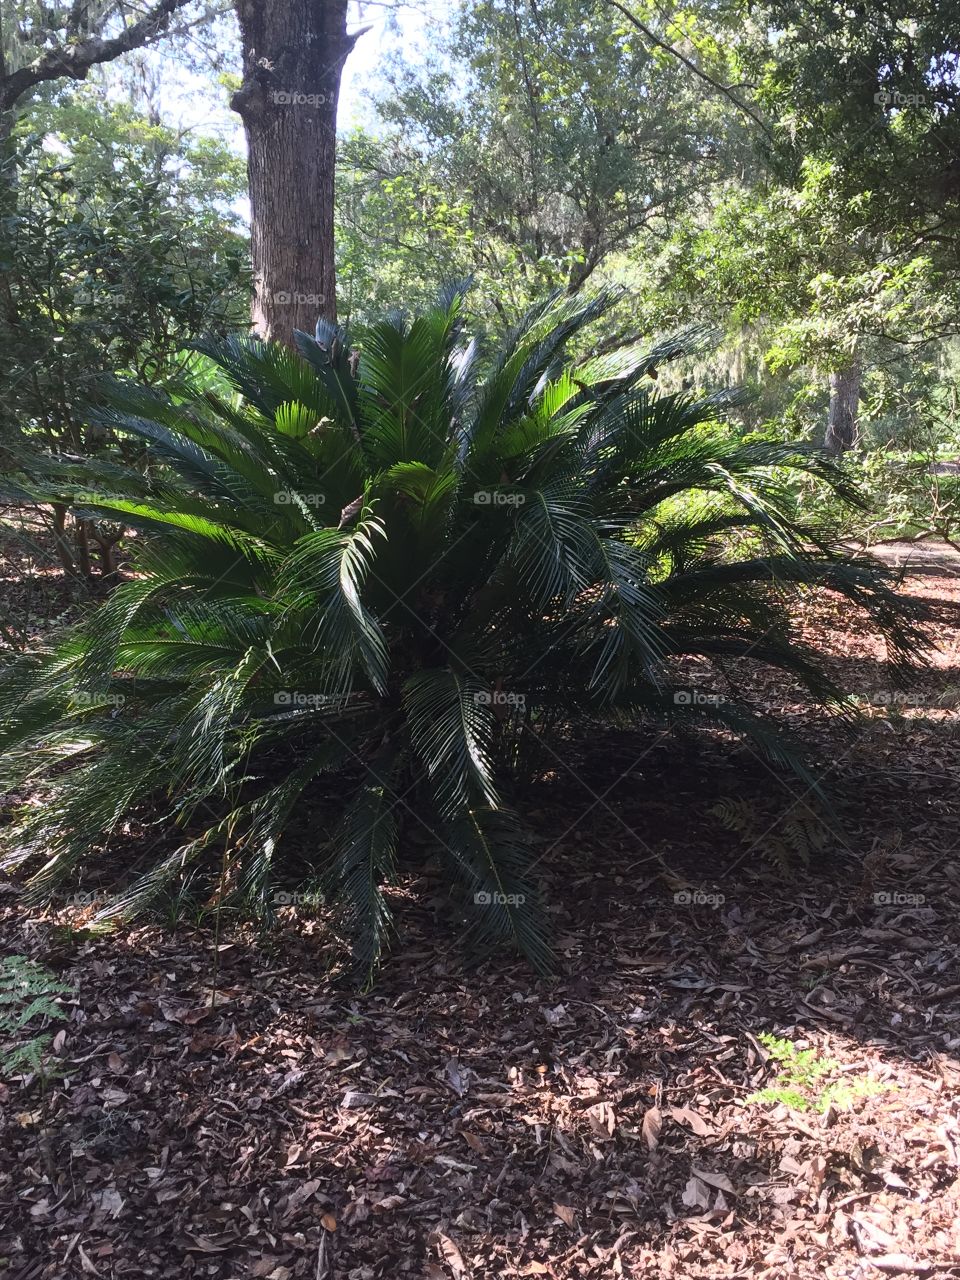 And here, we see "smallilonus bullyinouz" otherwise known as the "Bullied Palm."  At full maturity they normally stand just under 6'.  There are many sizes of palm trees. 